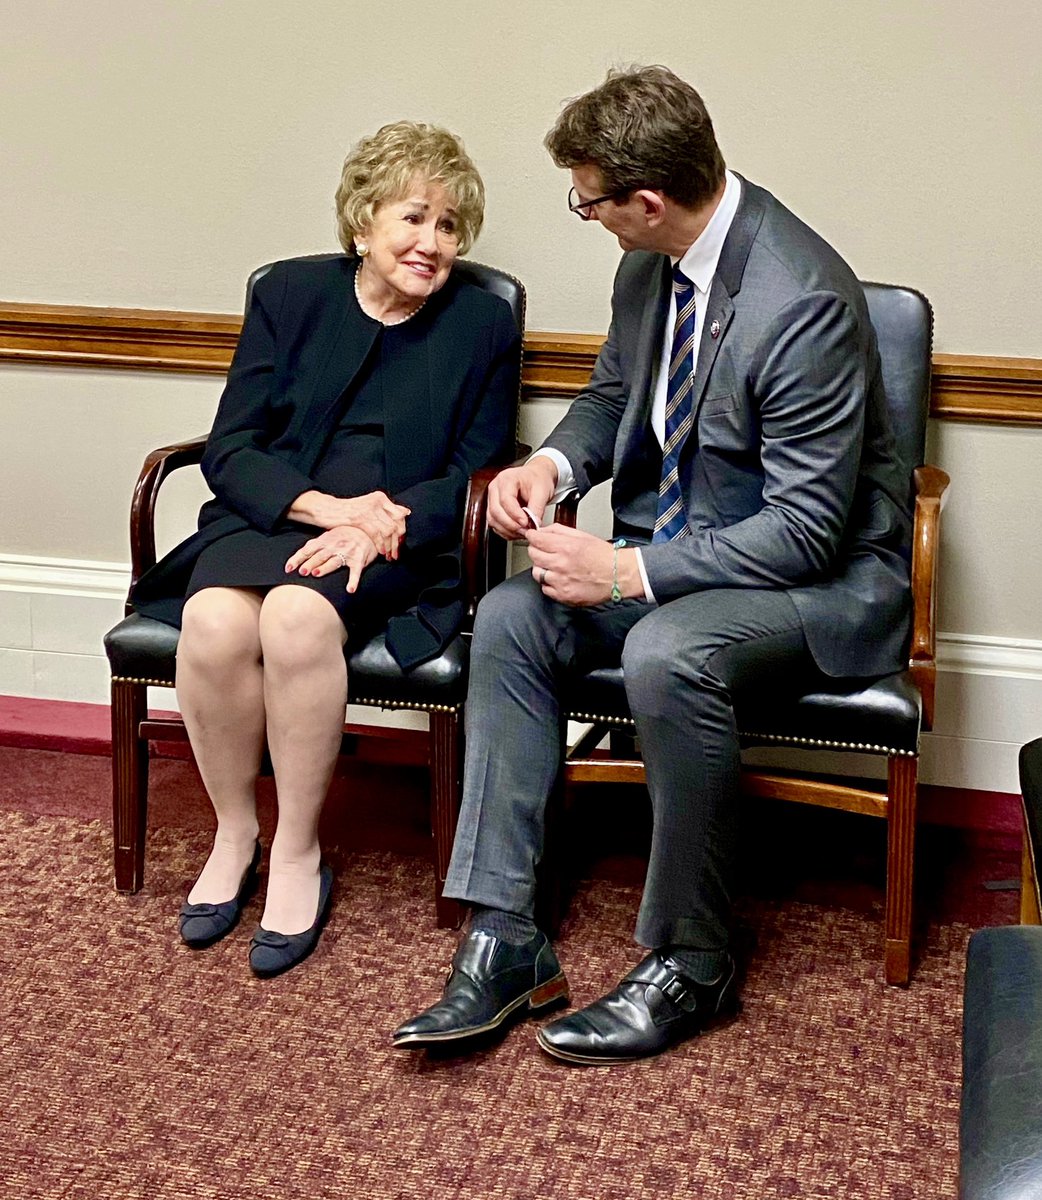 Proud to share a moment recently with Elizabeth Dole & discuss her experiences and fierce advocacy for veterans and families. I am a vocal supporter of the Elizabeth Dole Home Care Act, and I will continue to do all I can to support our selfless veterans and military caregivers.